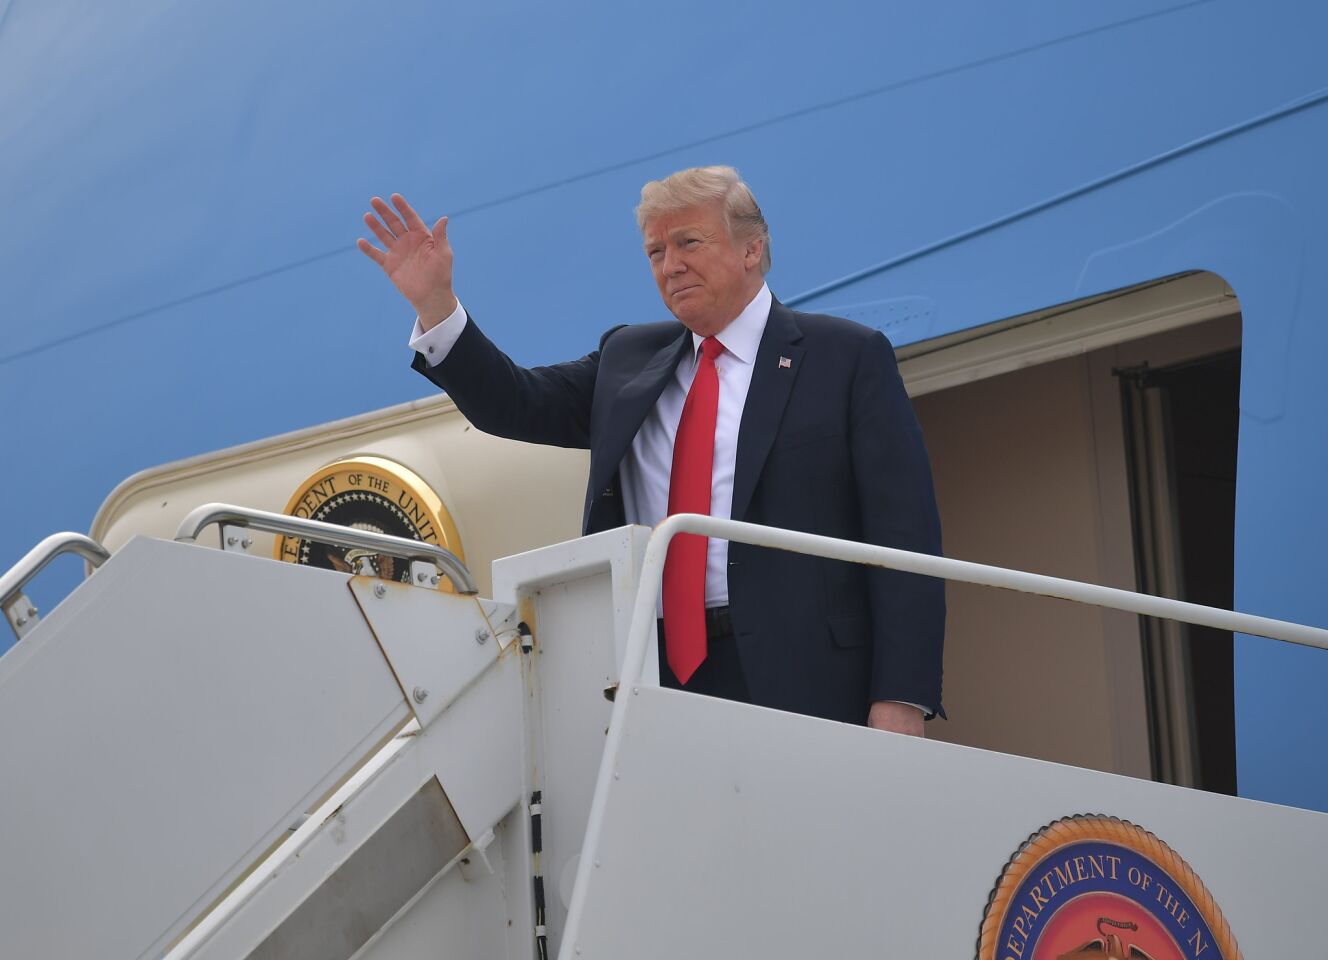 President Trump waves from Air Force One upon his arrival at Marine Corps Air Station Miramar near San Diego on March 13.